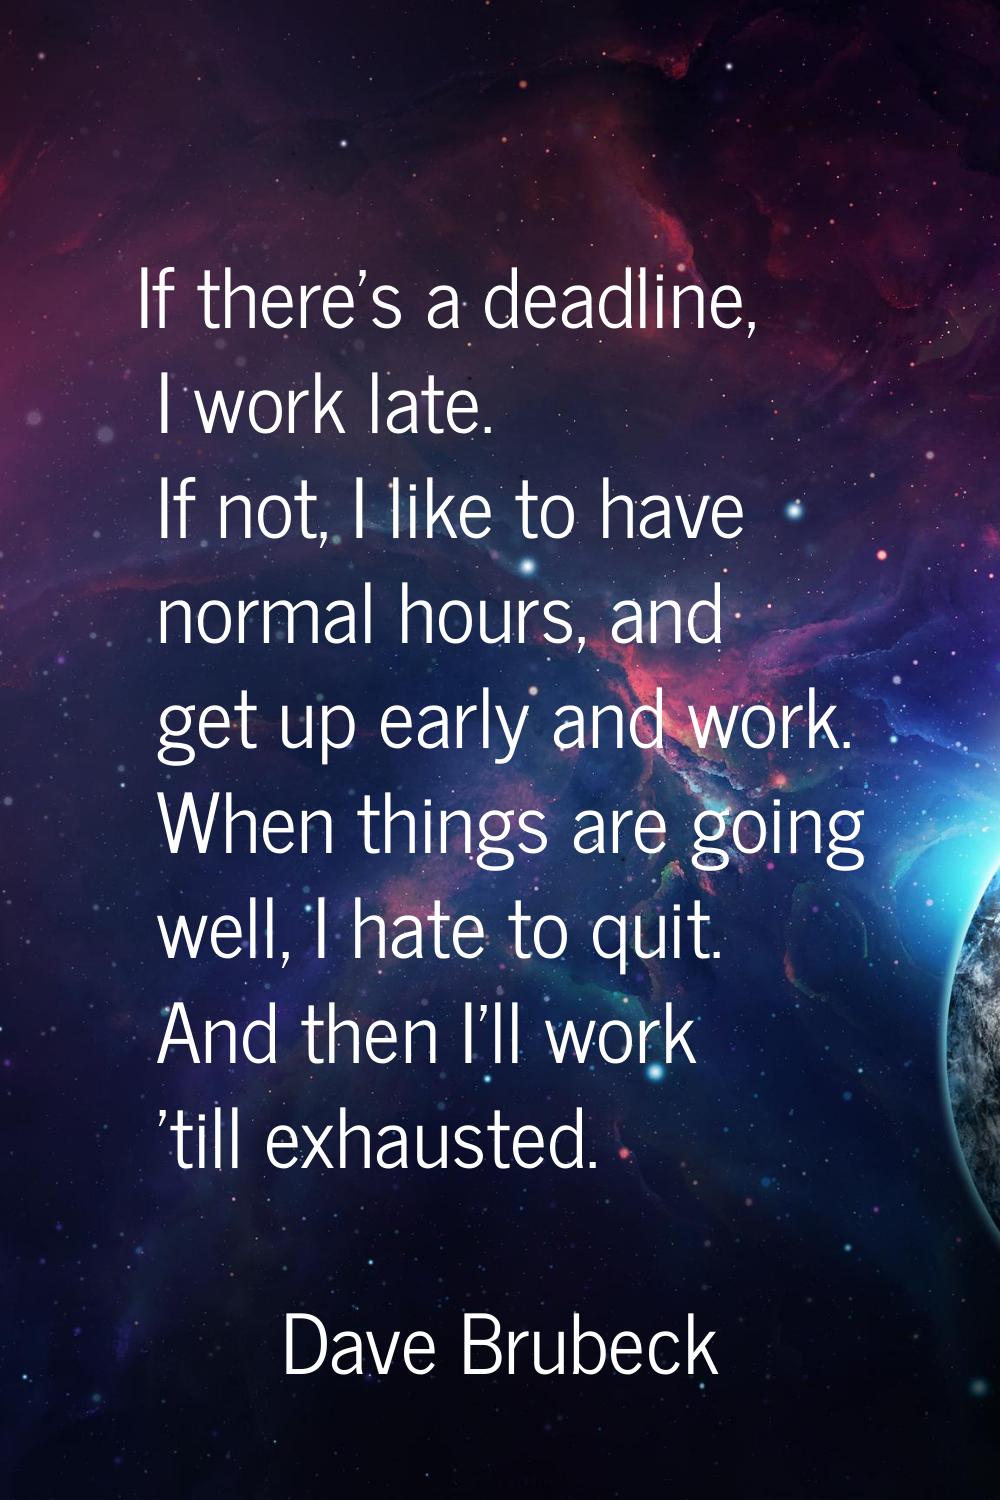 If there's a deadline, I work late. If not, I like to have normal hours, and get up early and work.